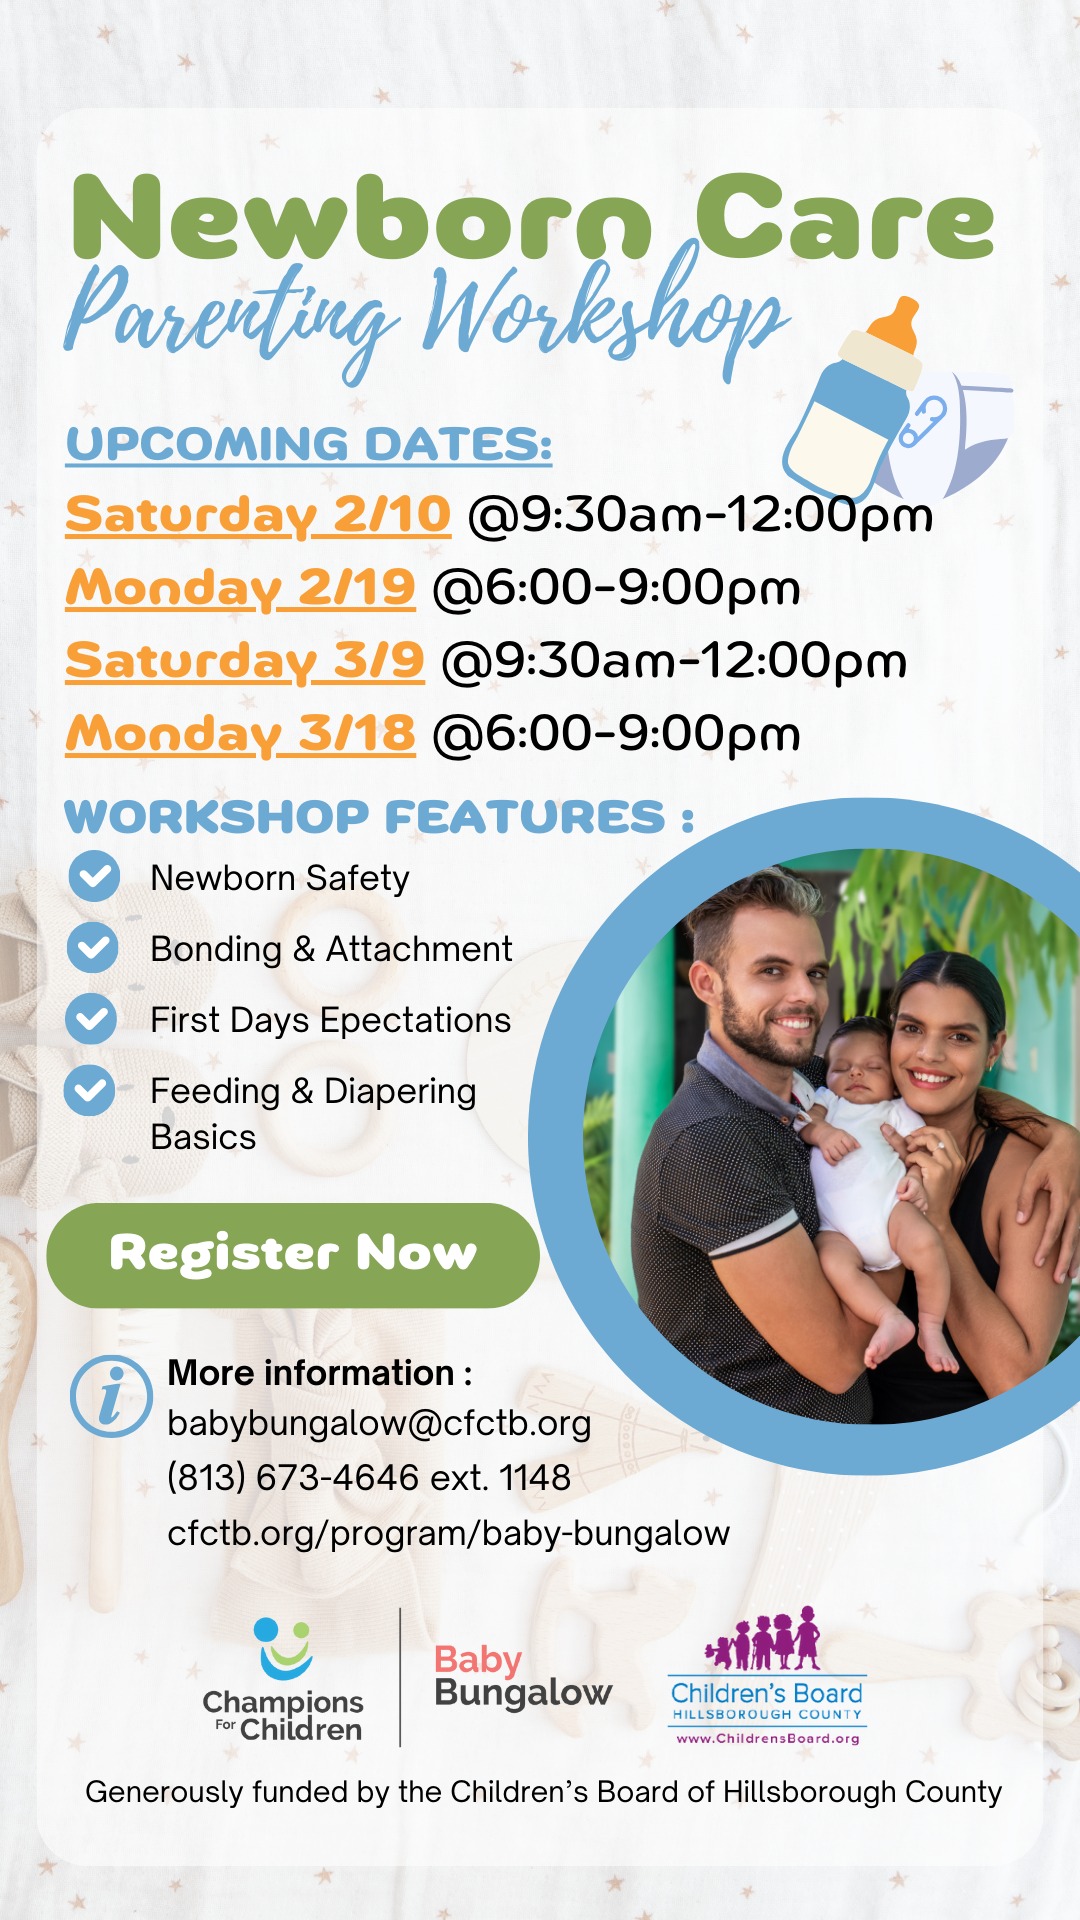 This graphic is for Newborn Care Parenting Workshop.